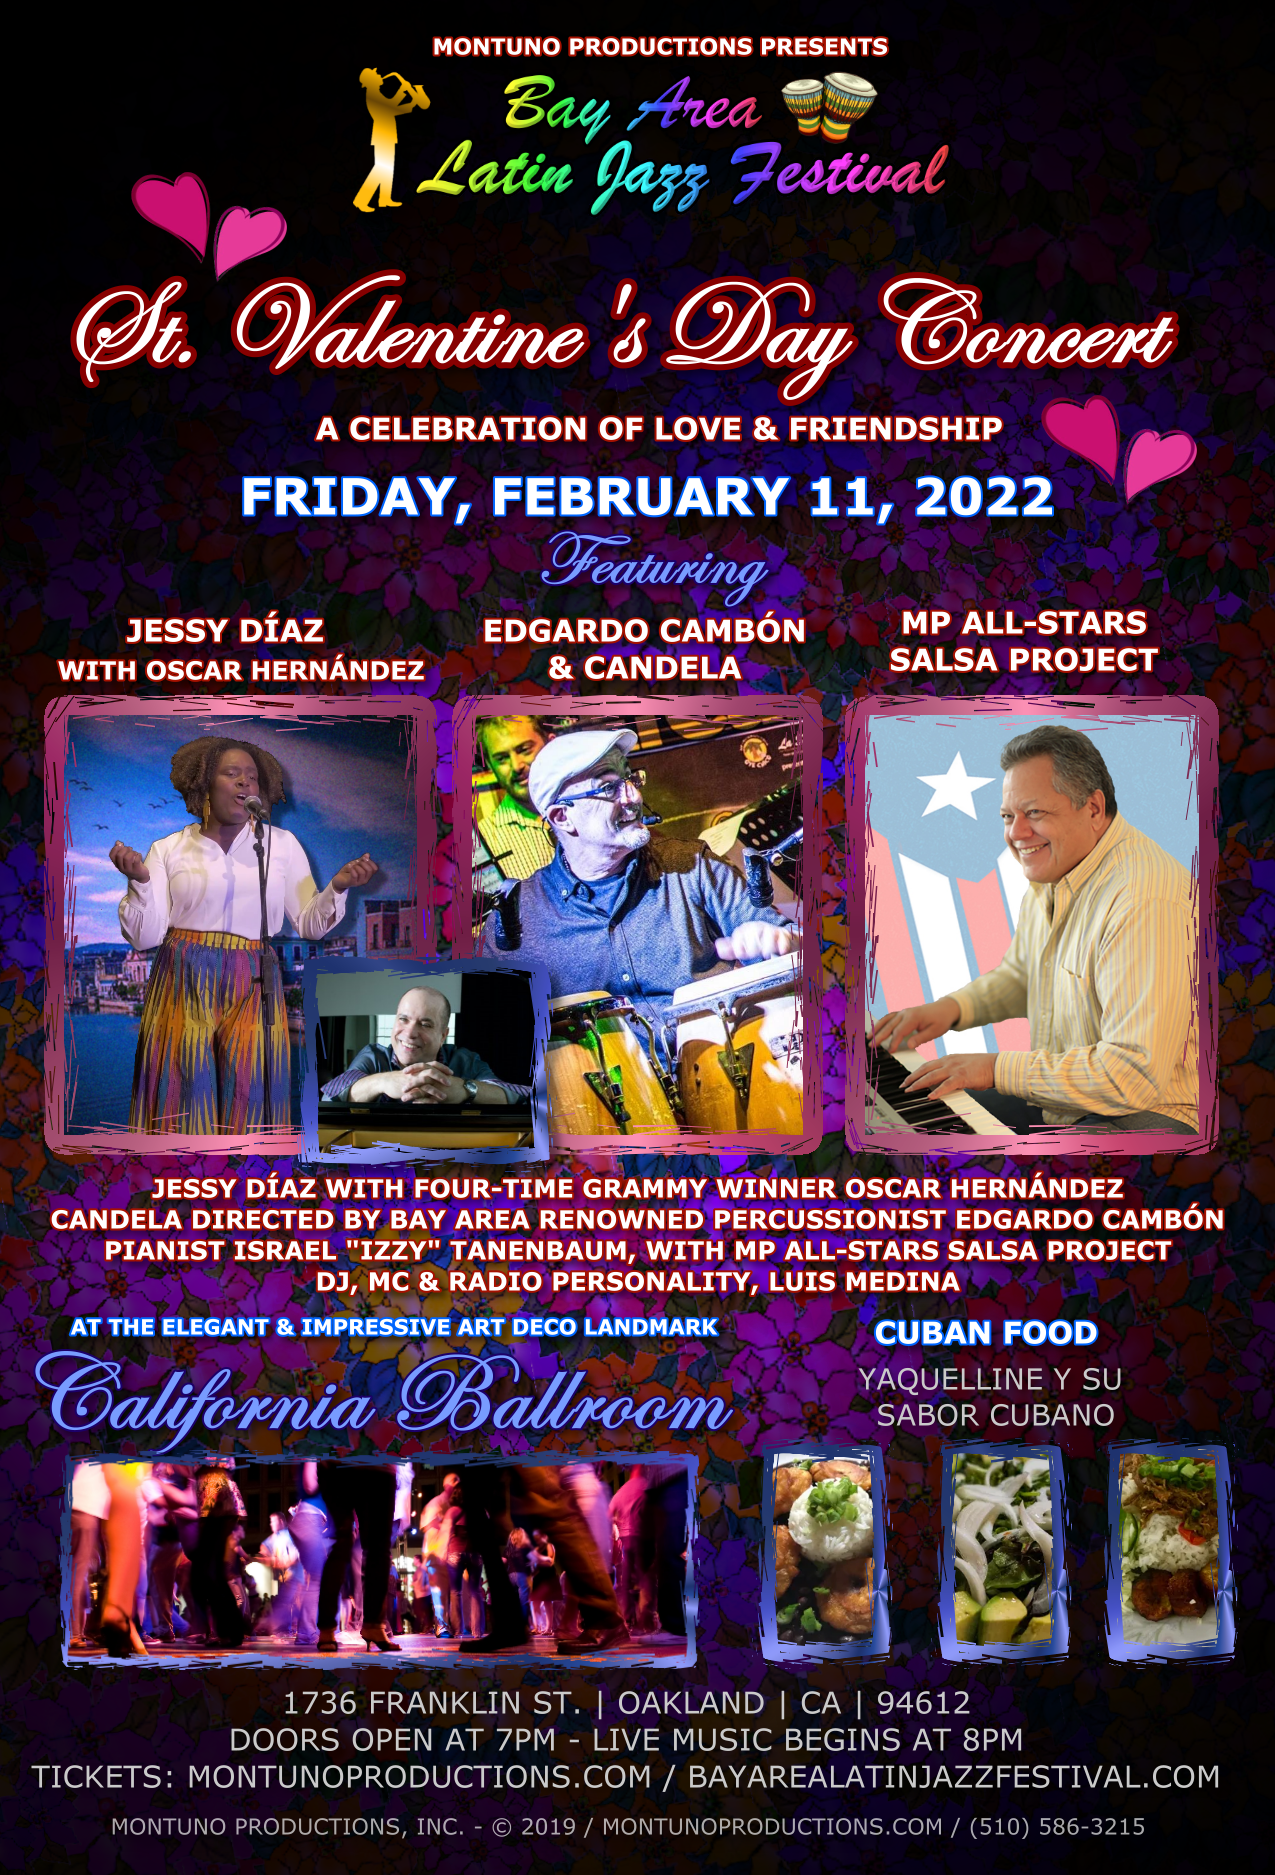 2nd Annual St. Valentine's Day Concert at the California Ballroom